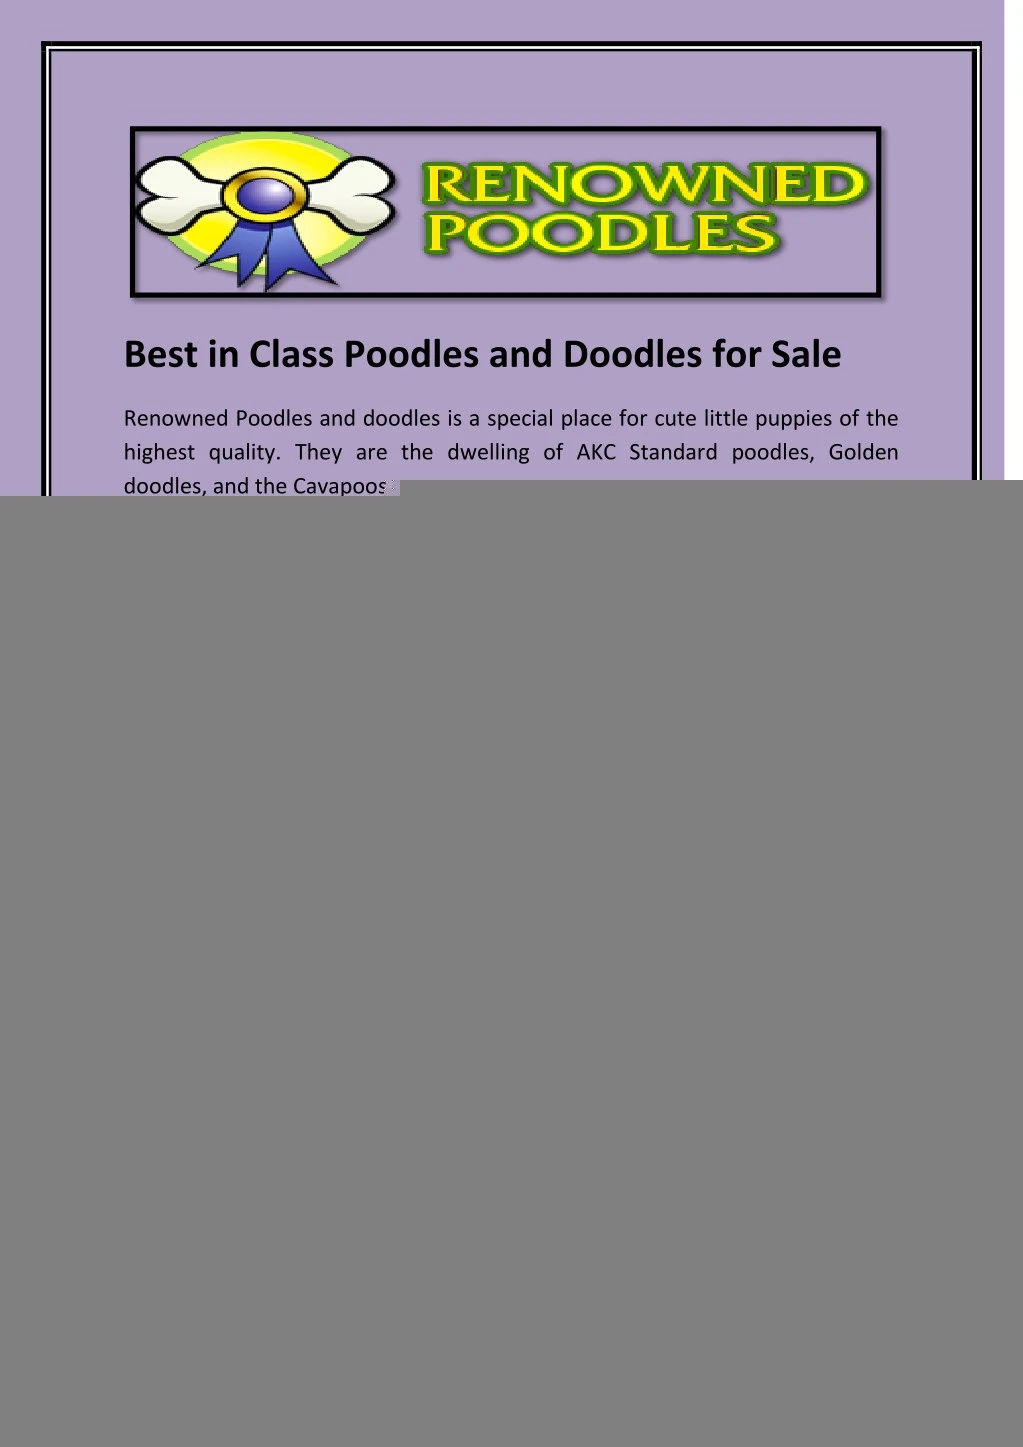 best in class poodles and doodles for sale